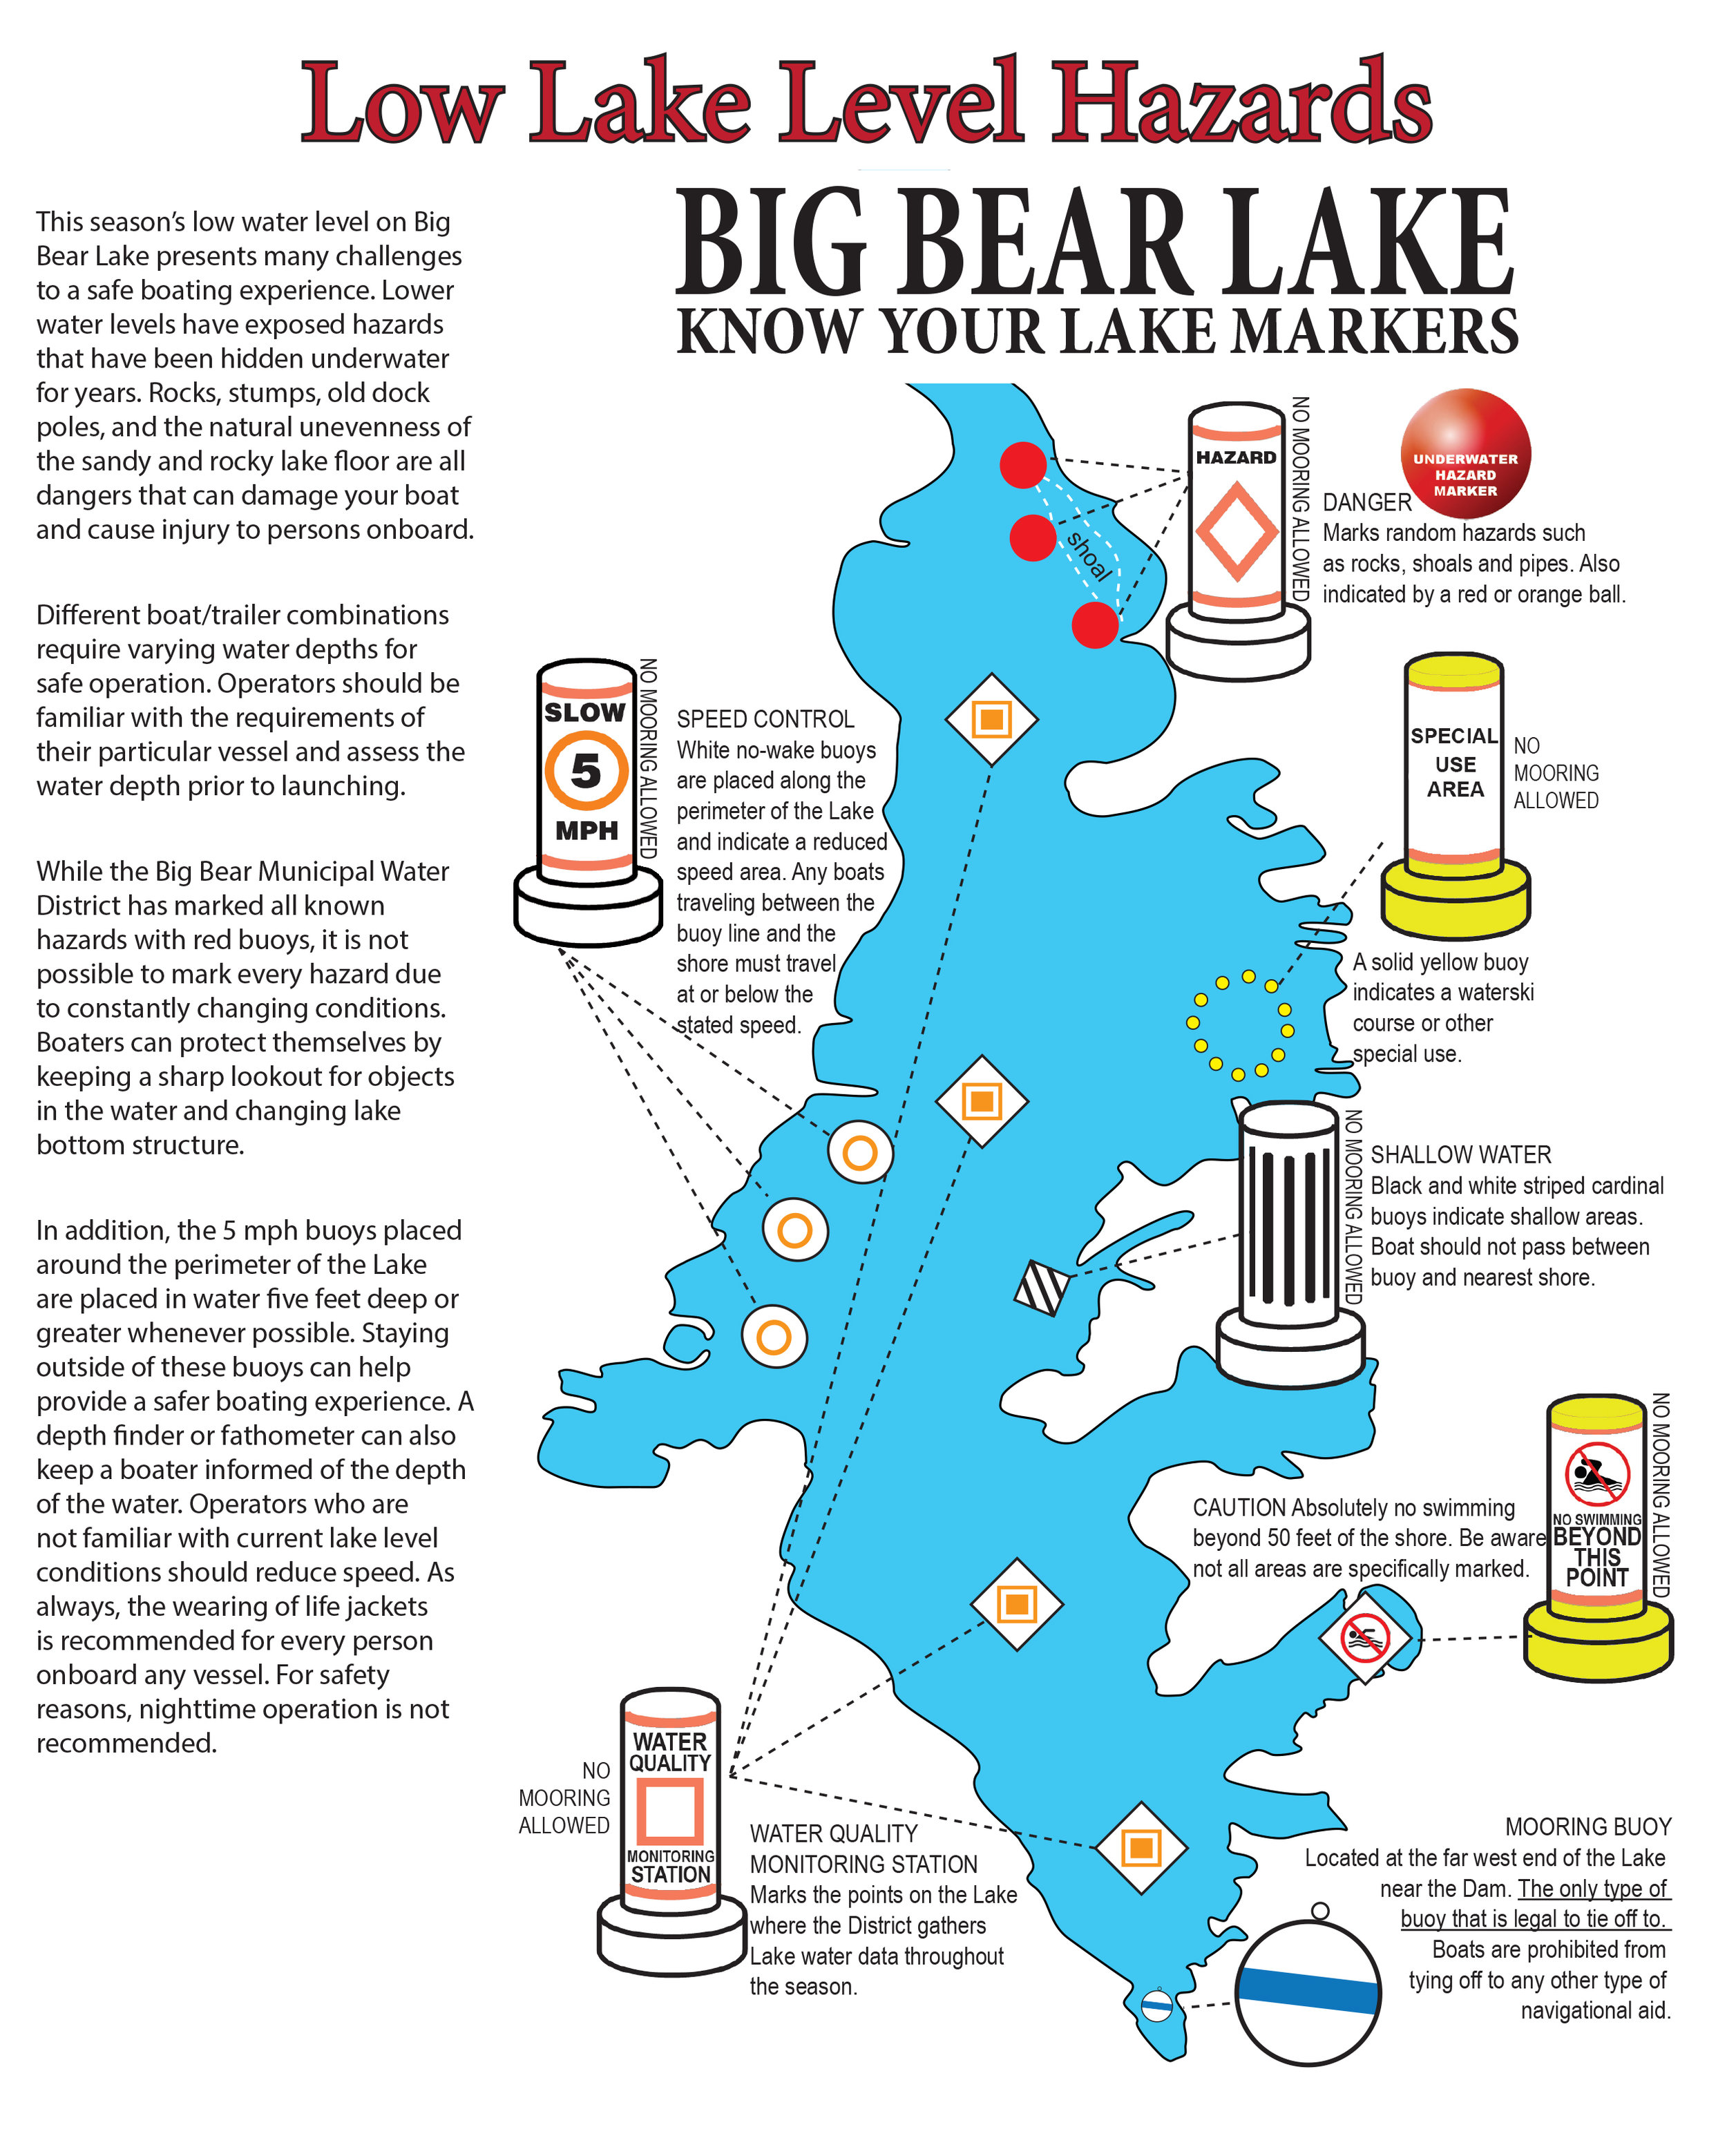 Can You Swim In Big Bear Lake Now Rules And Regulations Big Bear Municipal Water District